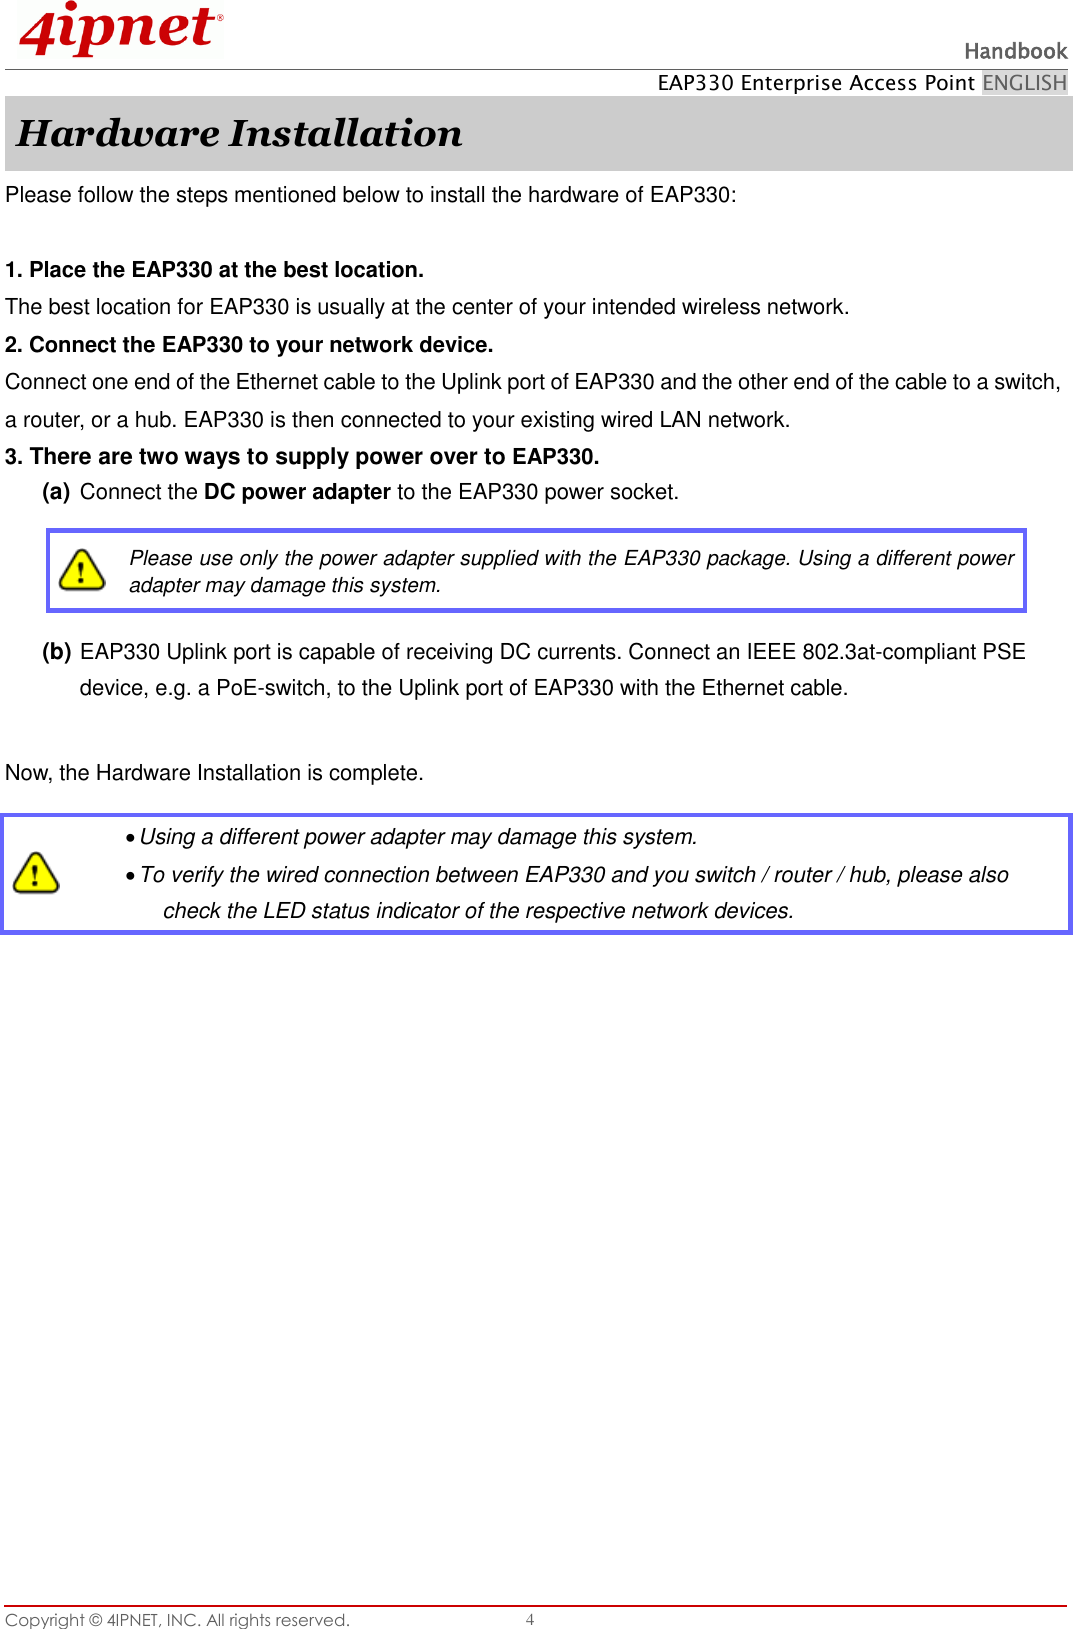  Handbook EAP330 Enterprise Access Point ENGLISH Copyright ©  4IPNET, INC. All rights reserved.   4 Hardware Installation Please follow the steps mentioned below to install the hardware of EAP330:  1. Place the EAP330 at the best location. The best location for EAP330 is usually at the center of your intended wireless network. 2. Connect the EAP330 to your network device. Connect one end of the Ethernet cable to the Uplink port of EAP330 and the other end of the cable to a switch, a router, or a hub. EAP330 is then connected to your existing wired LAN network. 3. There are two ways to supply power over to EAP330. (a) Connect the DC power adapter to the EAP330 power socket.  Please use only the power adapter supplied with the EAP330 package. Using a different power adapter may damage this system. (b) EAP330 Uplink port is capable of receiving DC currents. Connect an IEEE 802.3at-compliant PSE device, e.g. a PoE-switch, to the Uplink port of EAP330 with the Ethernet cable.  Now, the Hardware Installation is complete.     Using a different power adapter may damage this system.  To verify the wired connection between EAP330 and you switch / router / hub, please also check the LED status indicator of the respective network devices.  